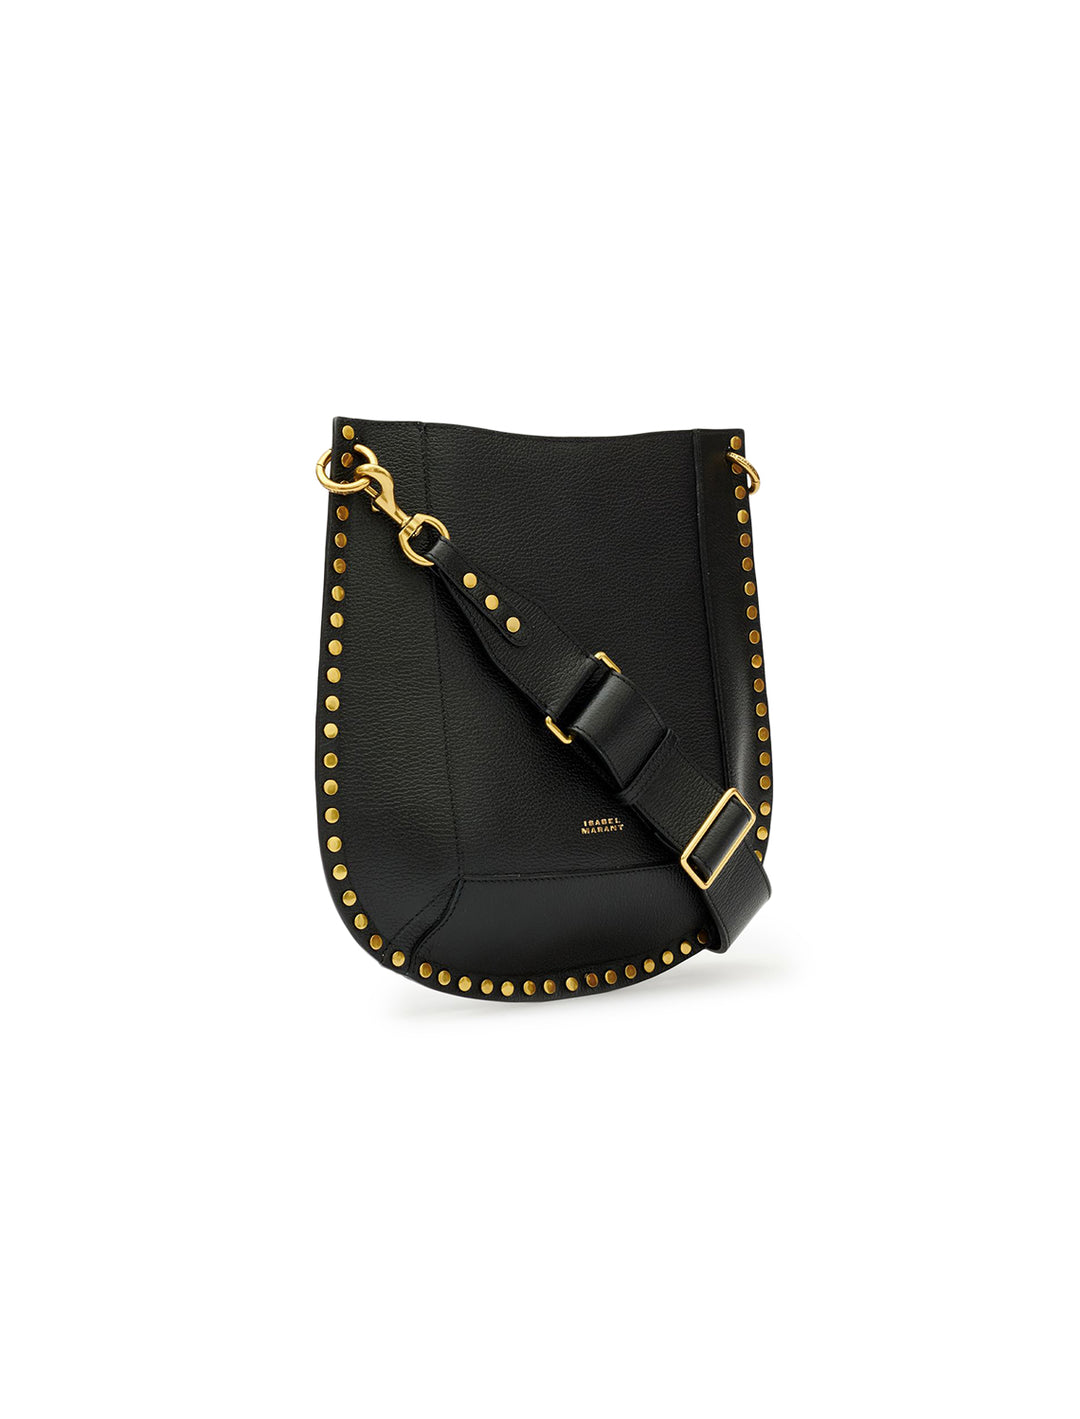 Front angle view of Isabel Marant Etoile's oksan grained leather shoulder bag in black.